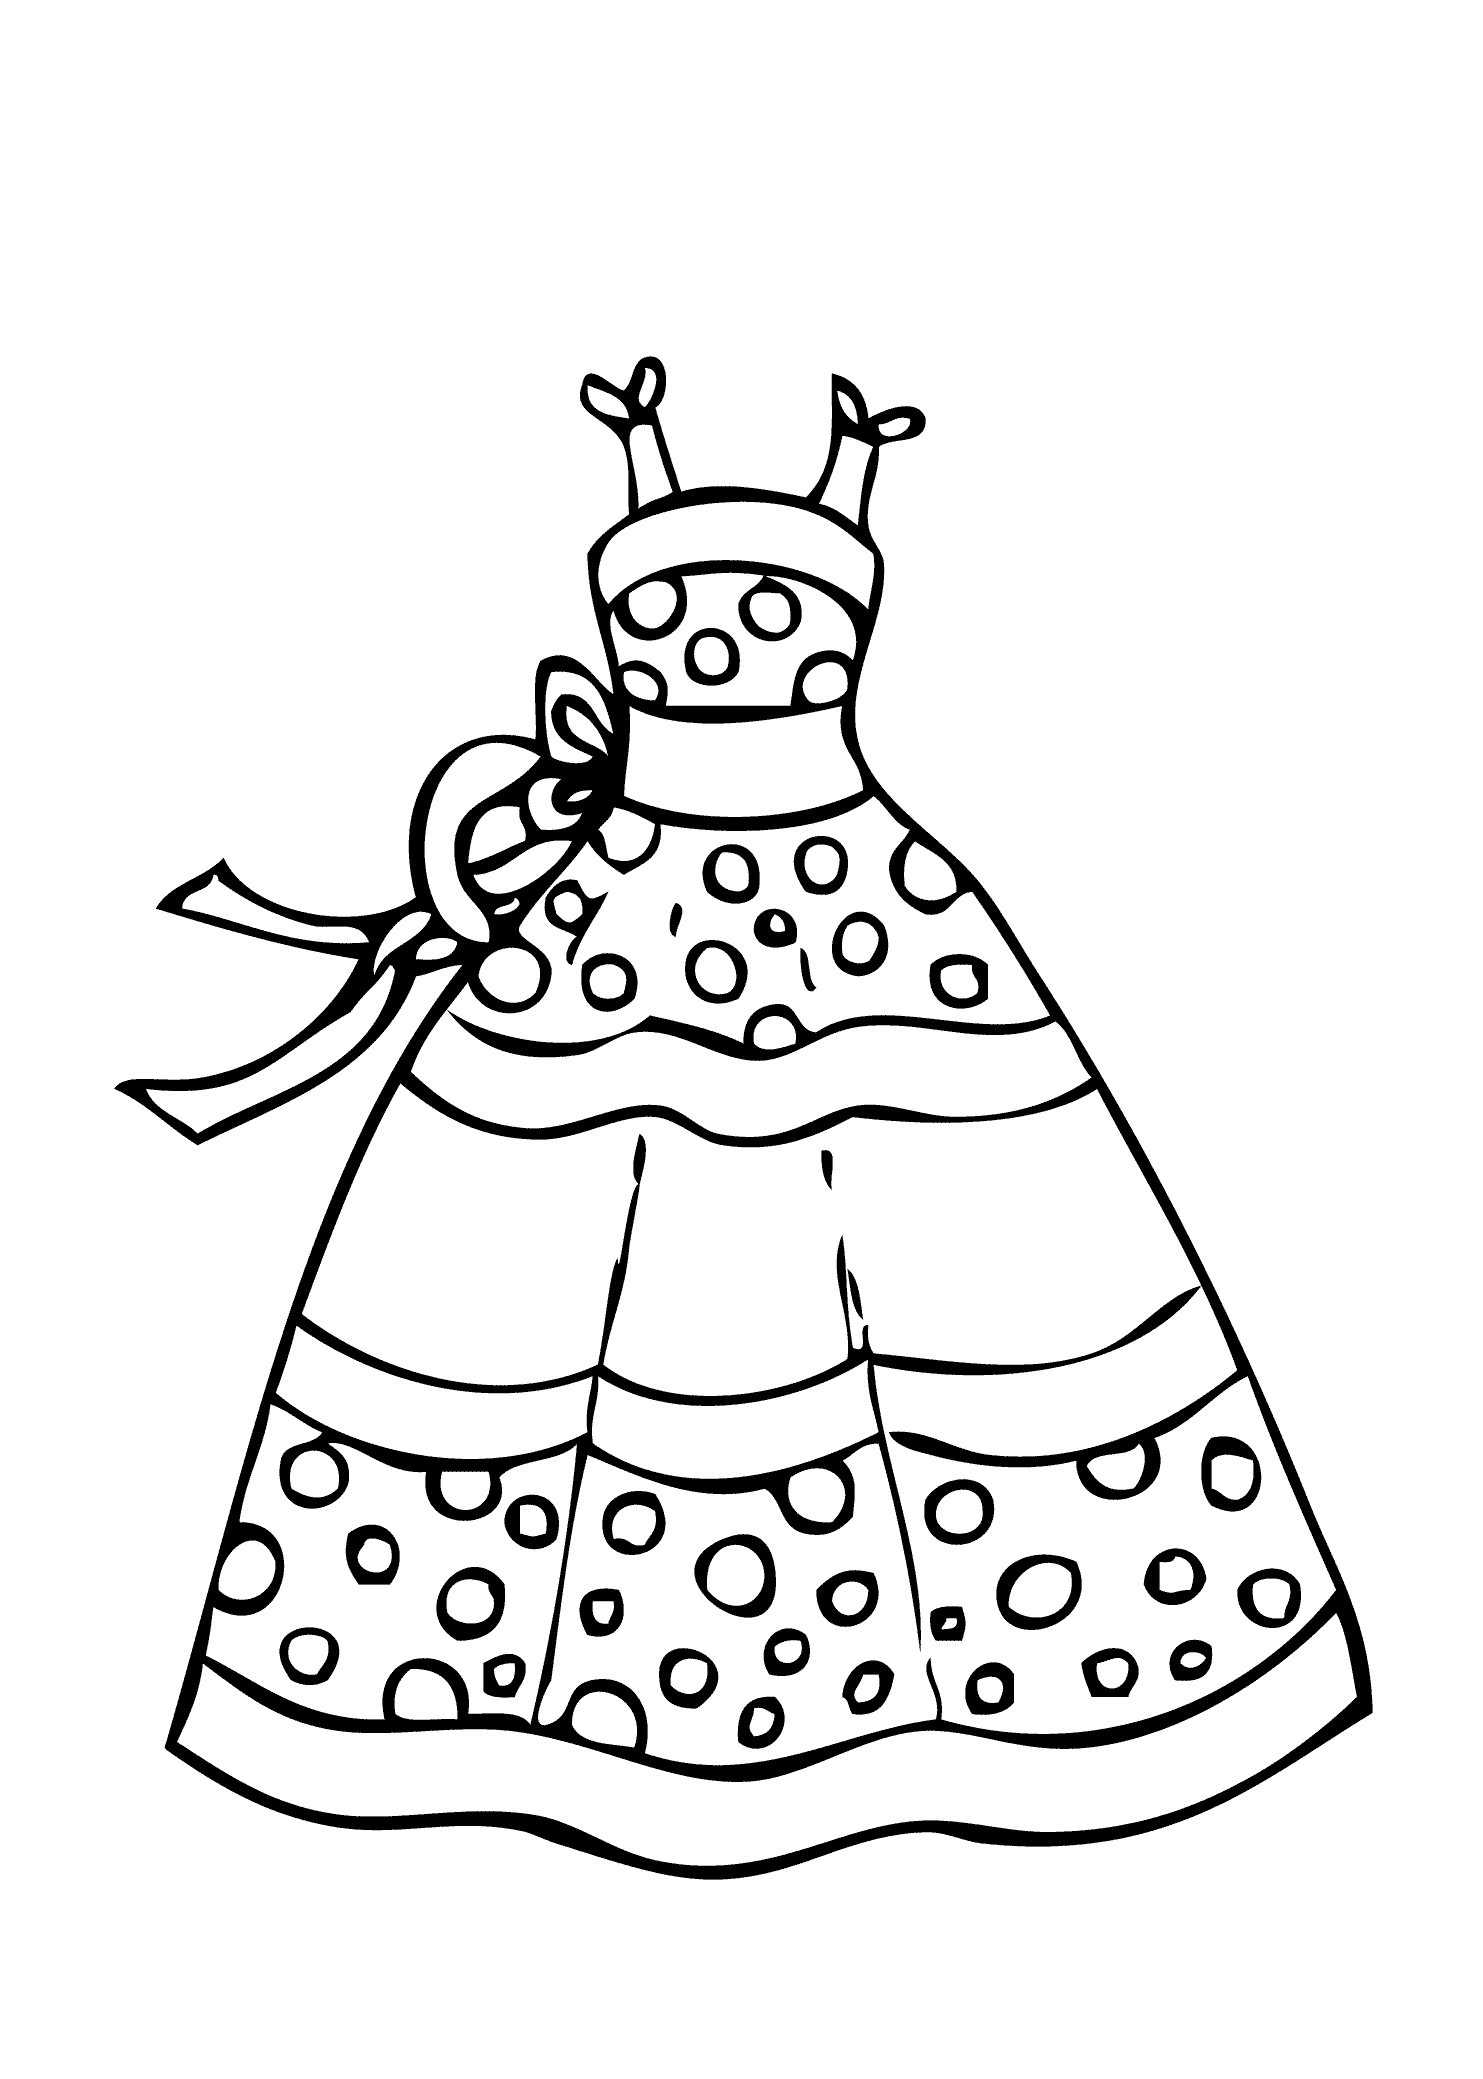 Clothing Coloring Page Printable Coloring Pages For All